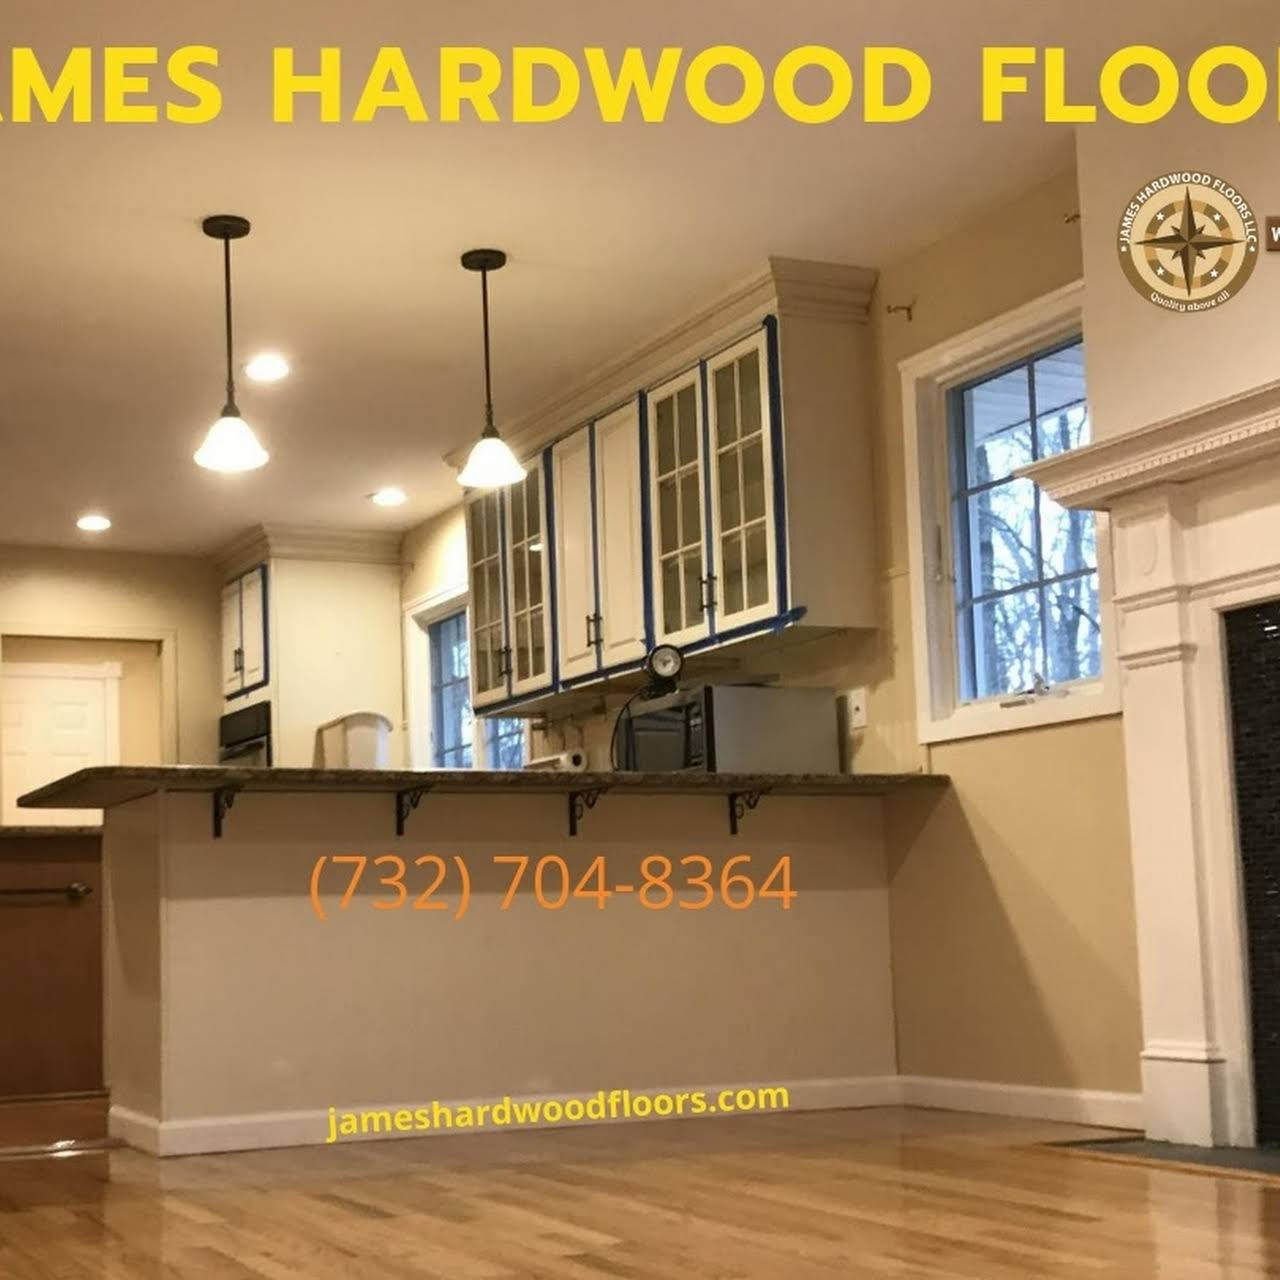 16 Lovely Price for Sanding and Refinishing Hardwood Floors 2022 free download price for sanding and refinishing hardwood floors of james hardwood floorsa llc local contractor no retail price again with are you looking f